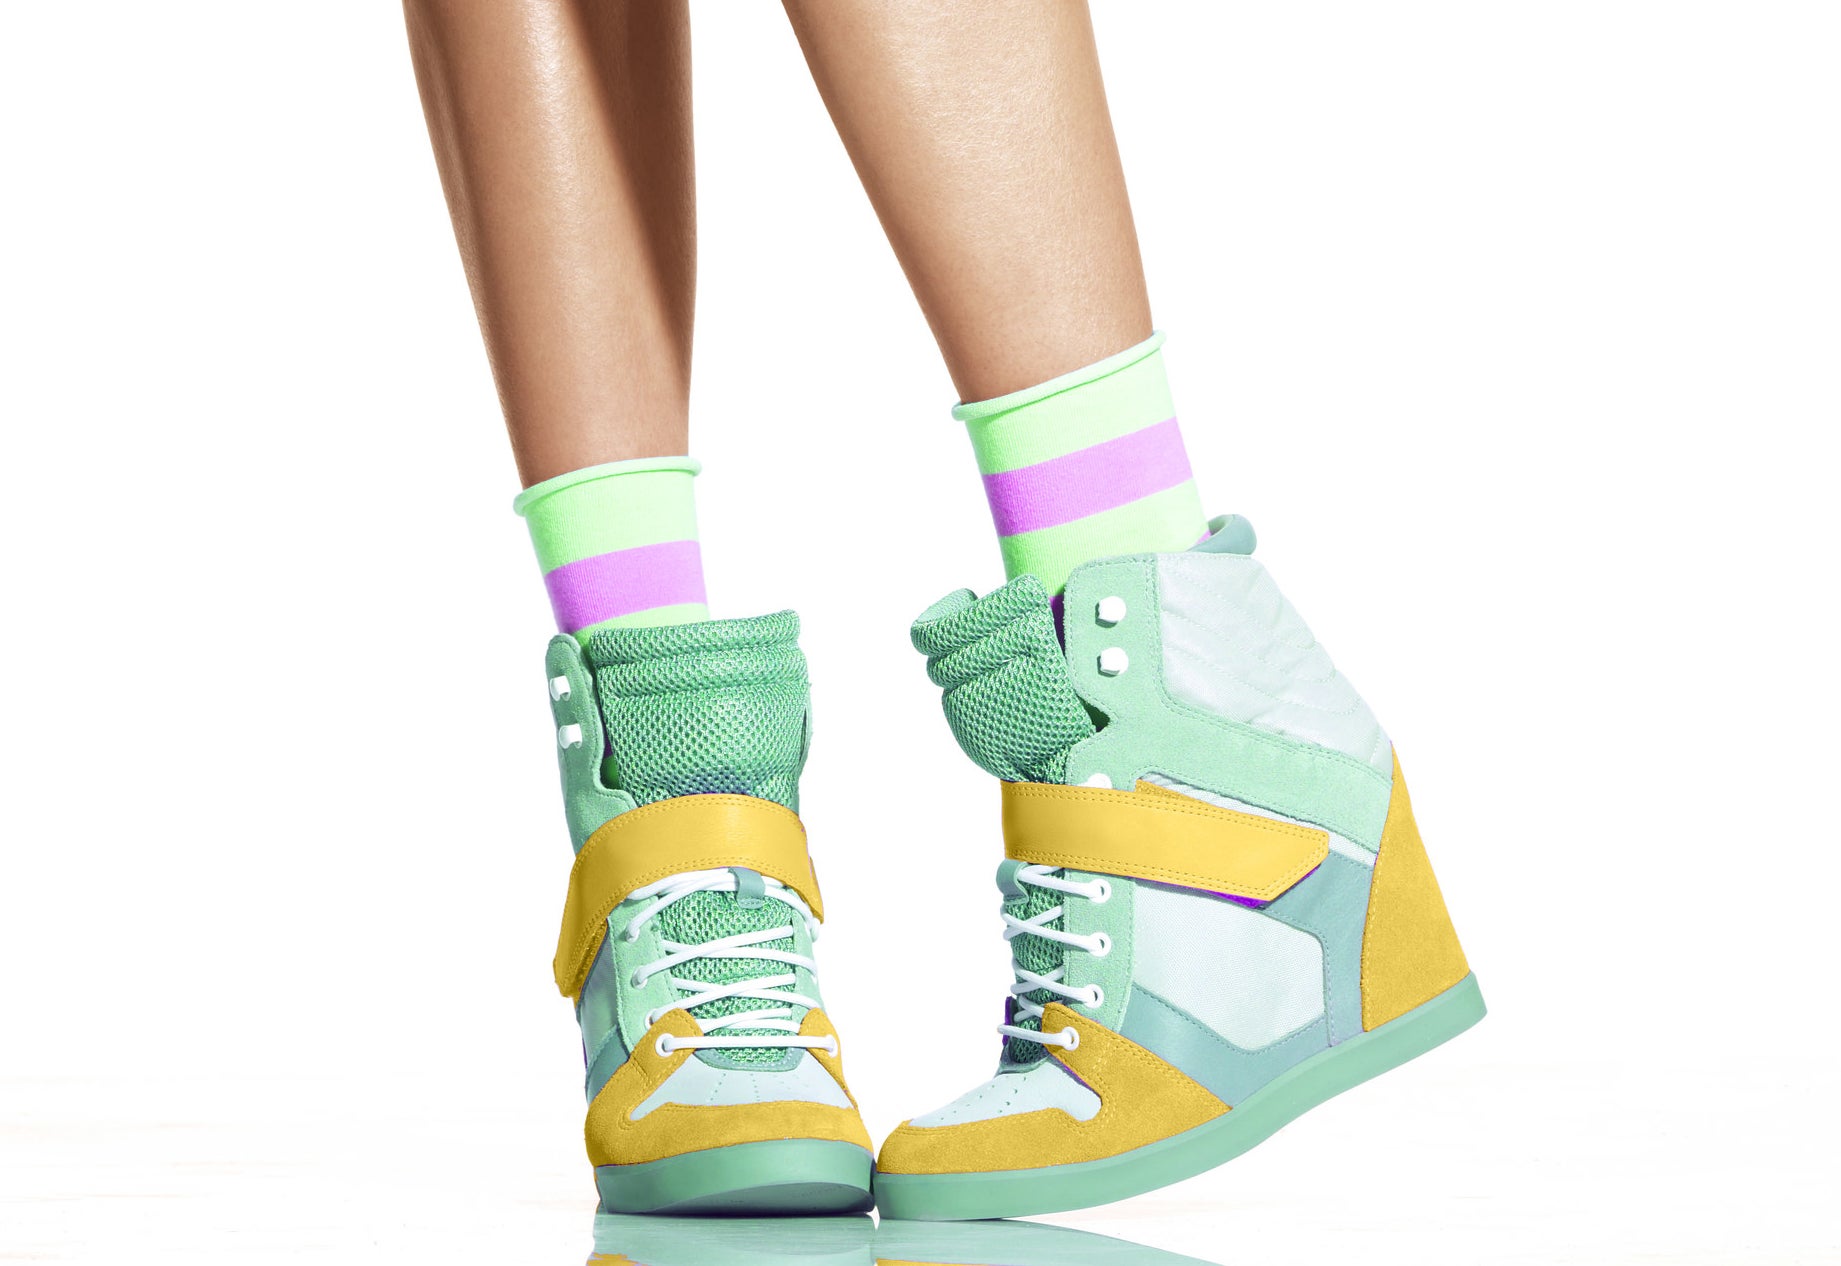 A shot of a model from waist down, showing green and yellow high wedge sneakers